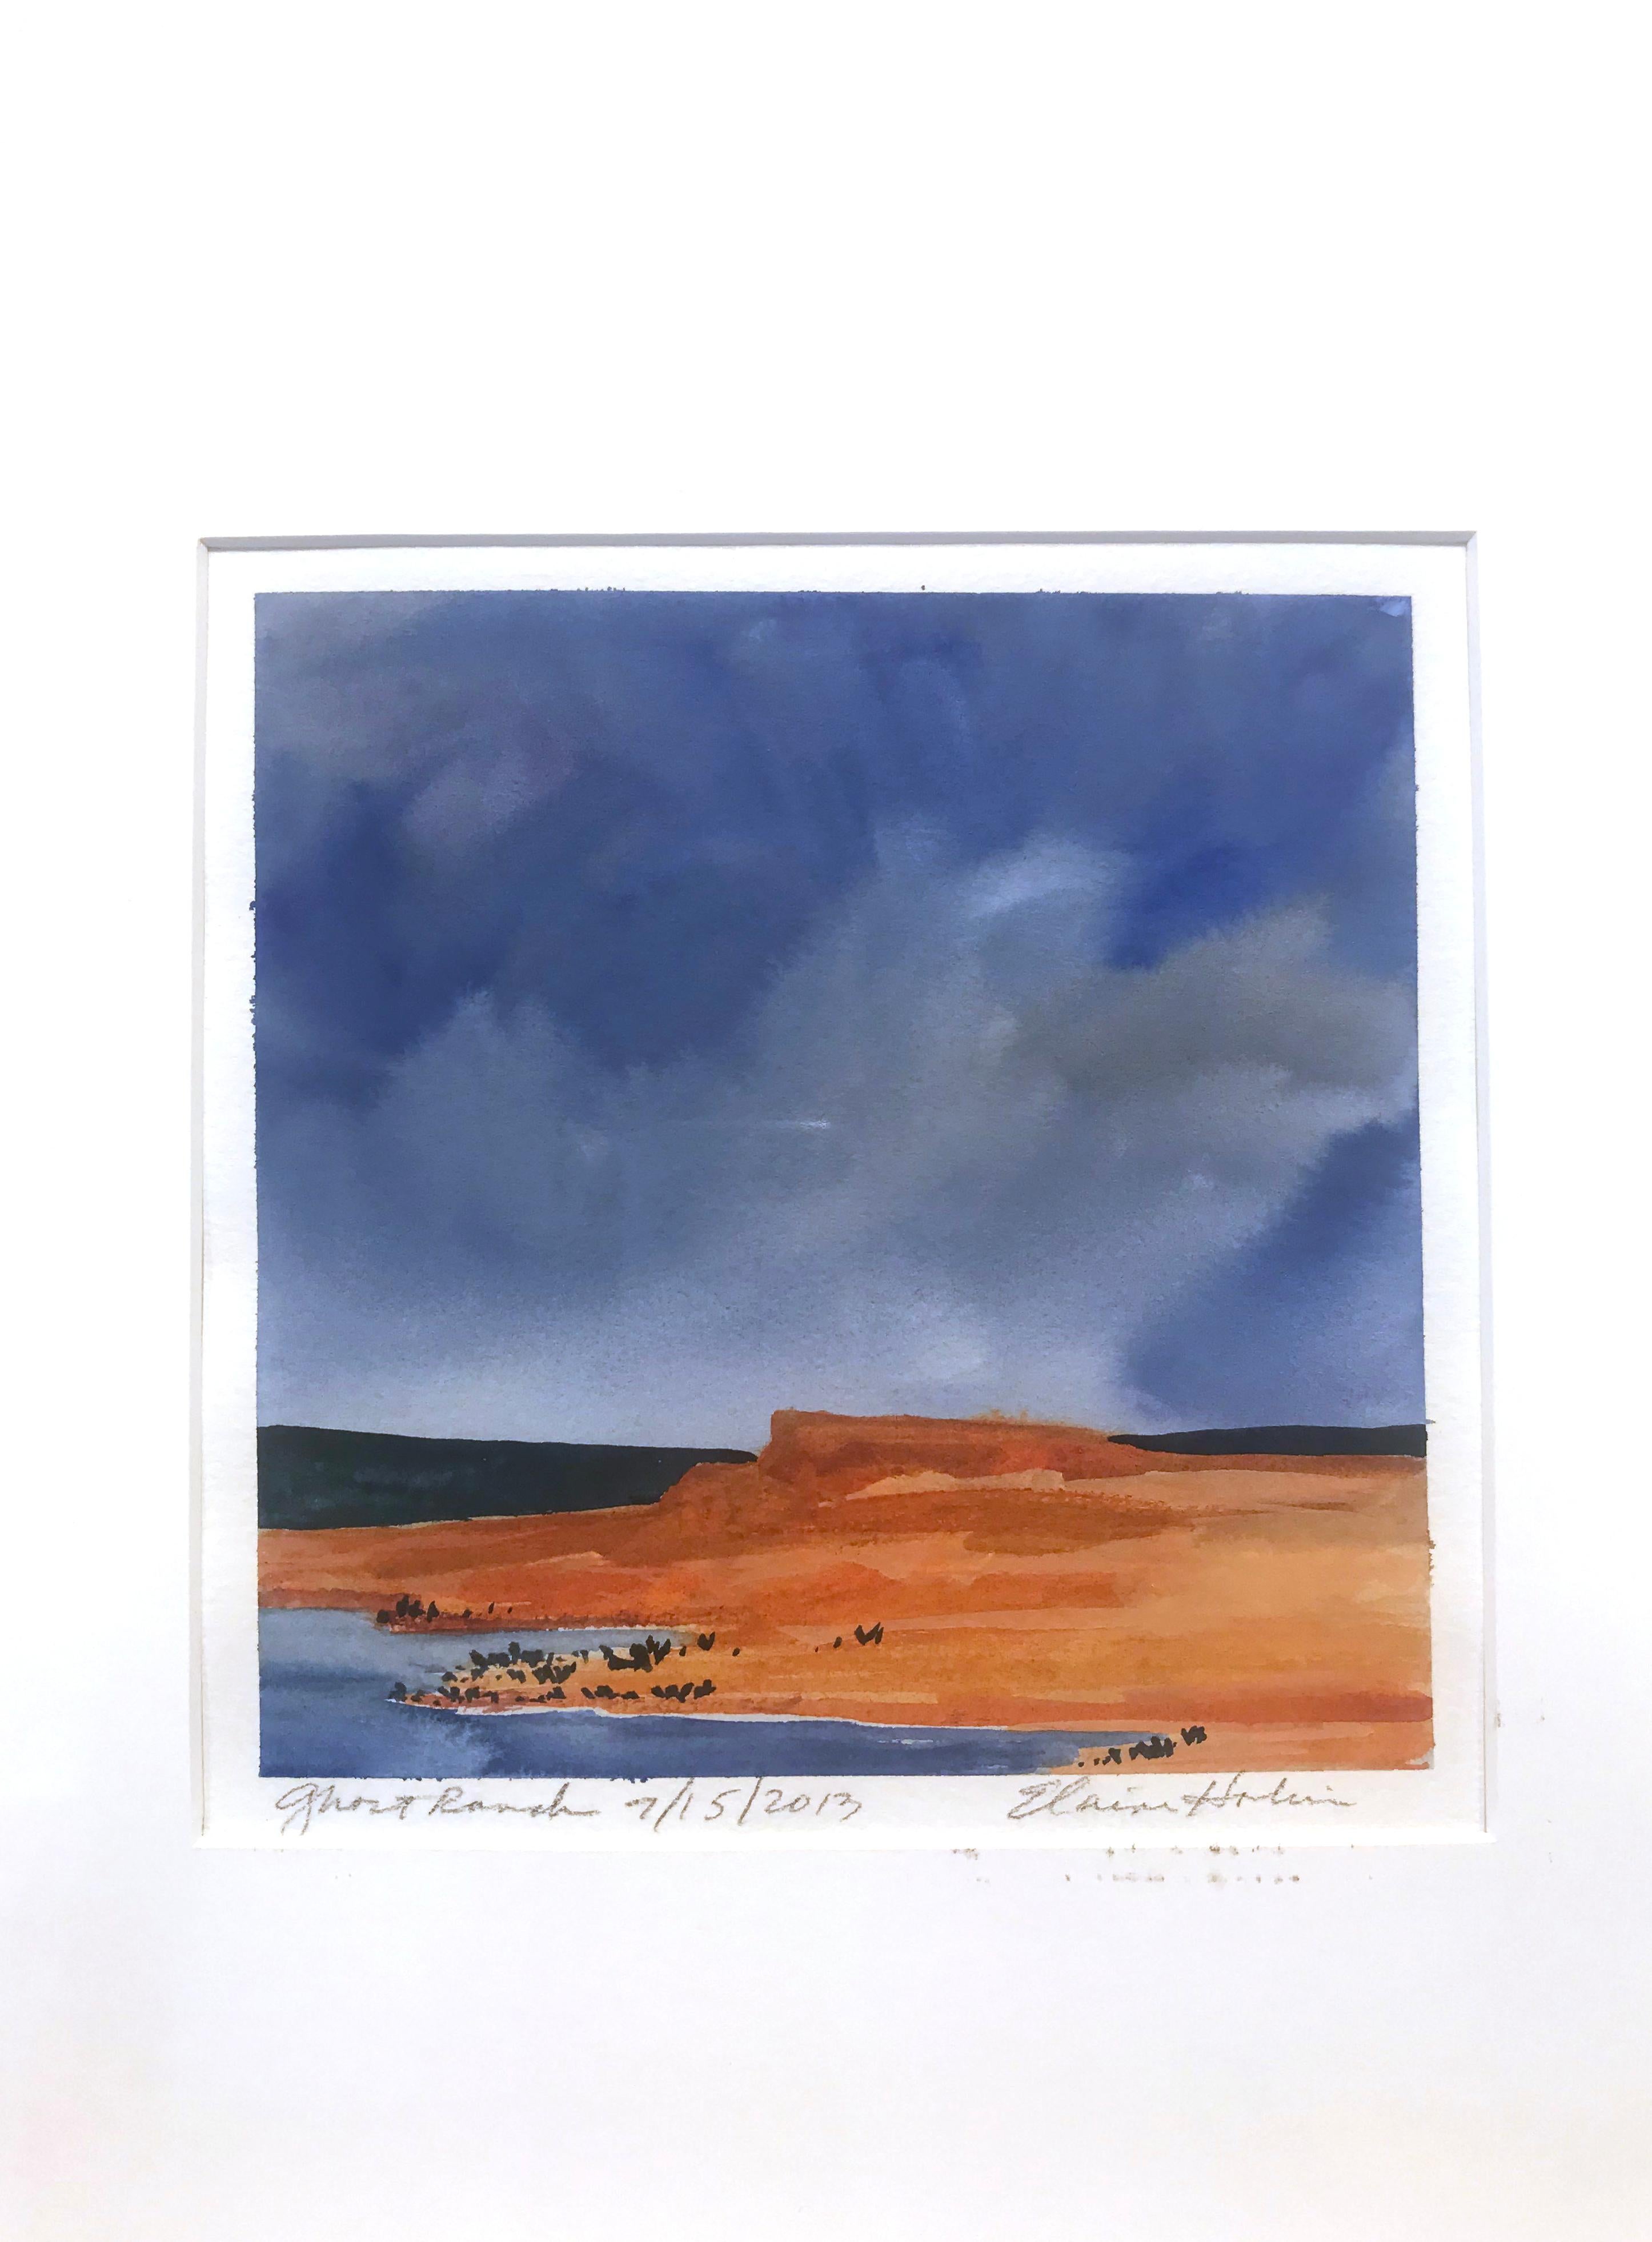 Ghost Ranch 7/15/2013 - Painting by Elaine Holien